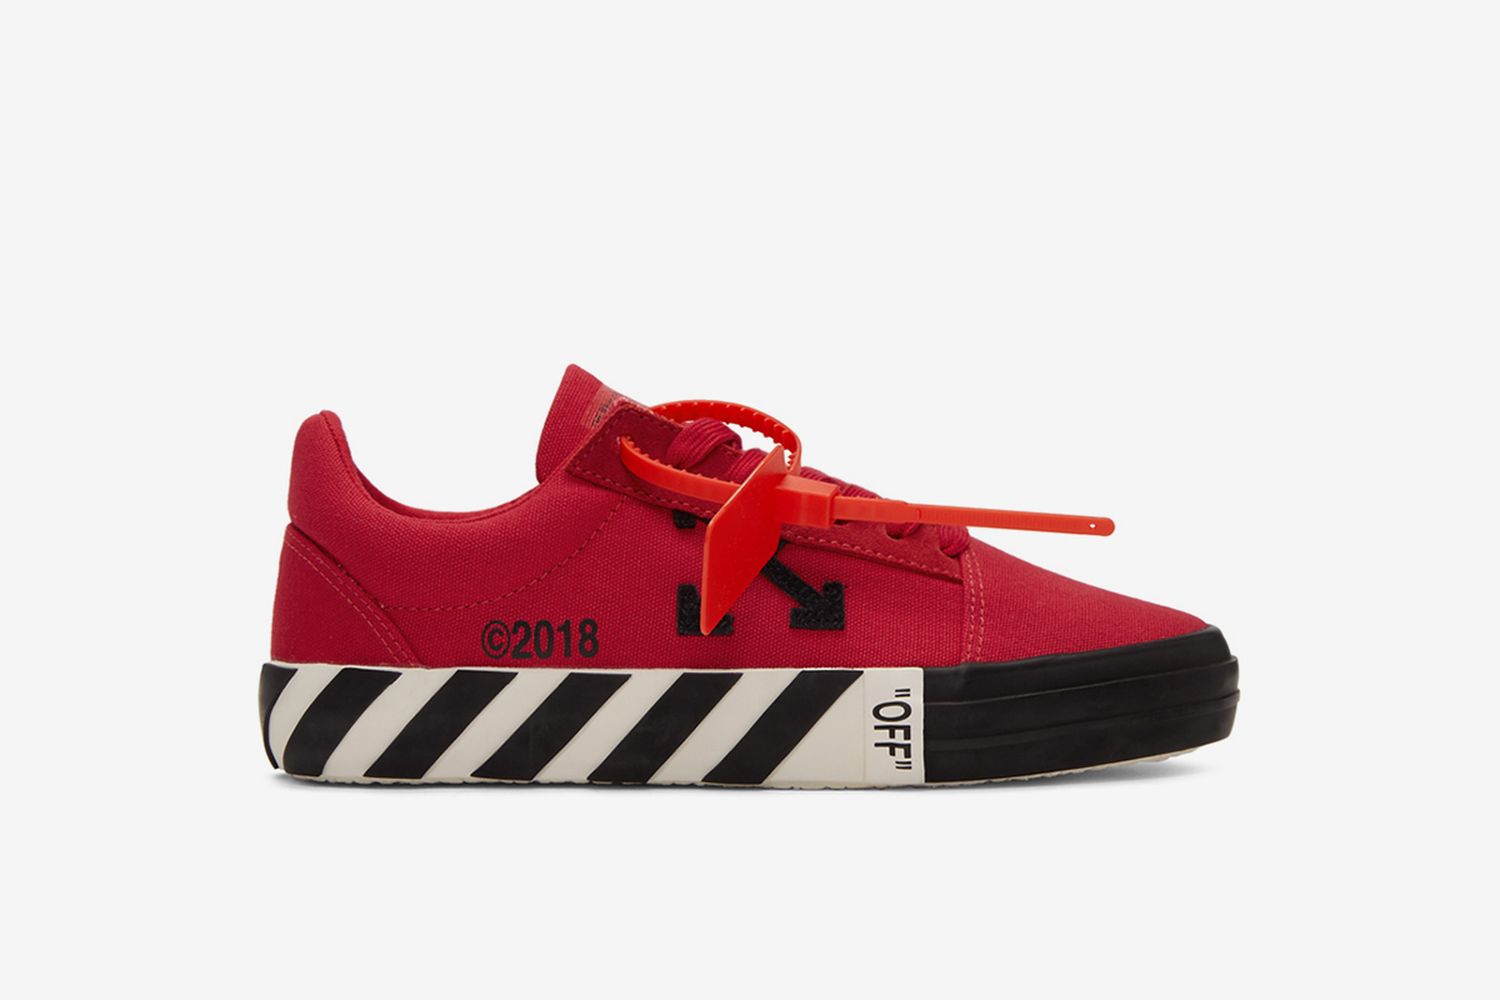 Brun i gang legering These OFF-WHITE Sneakers are the Closest Thing to a Vans Collab